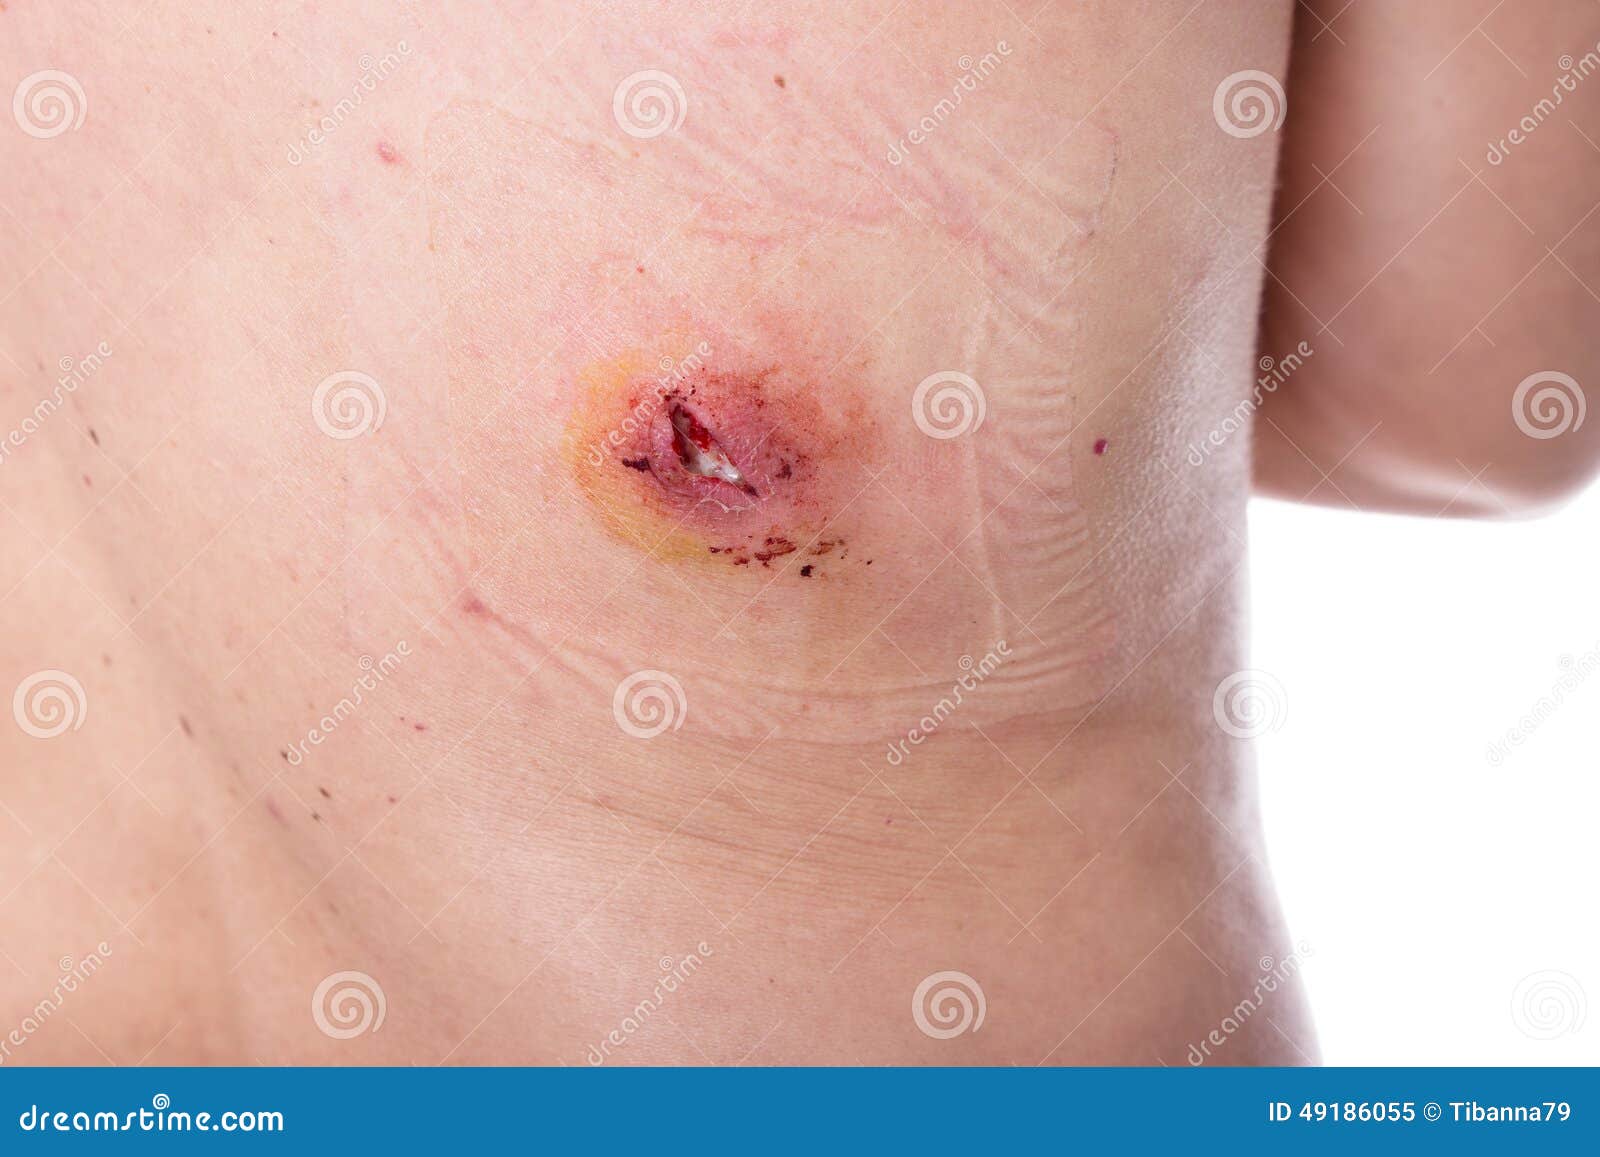 Open Wound Images